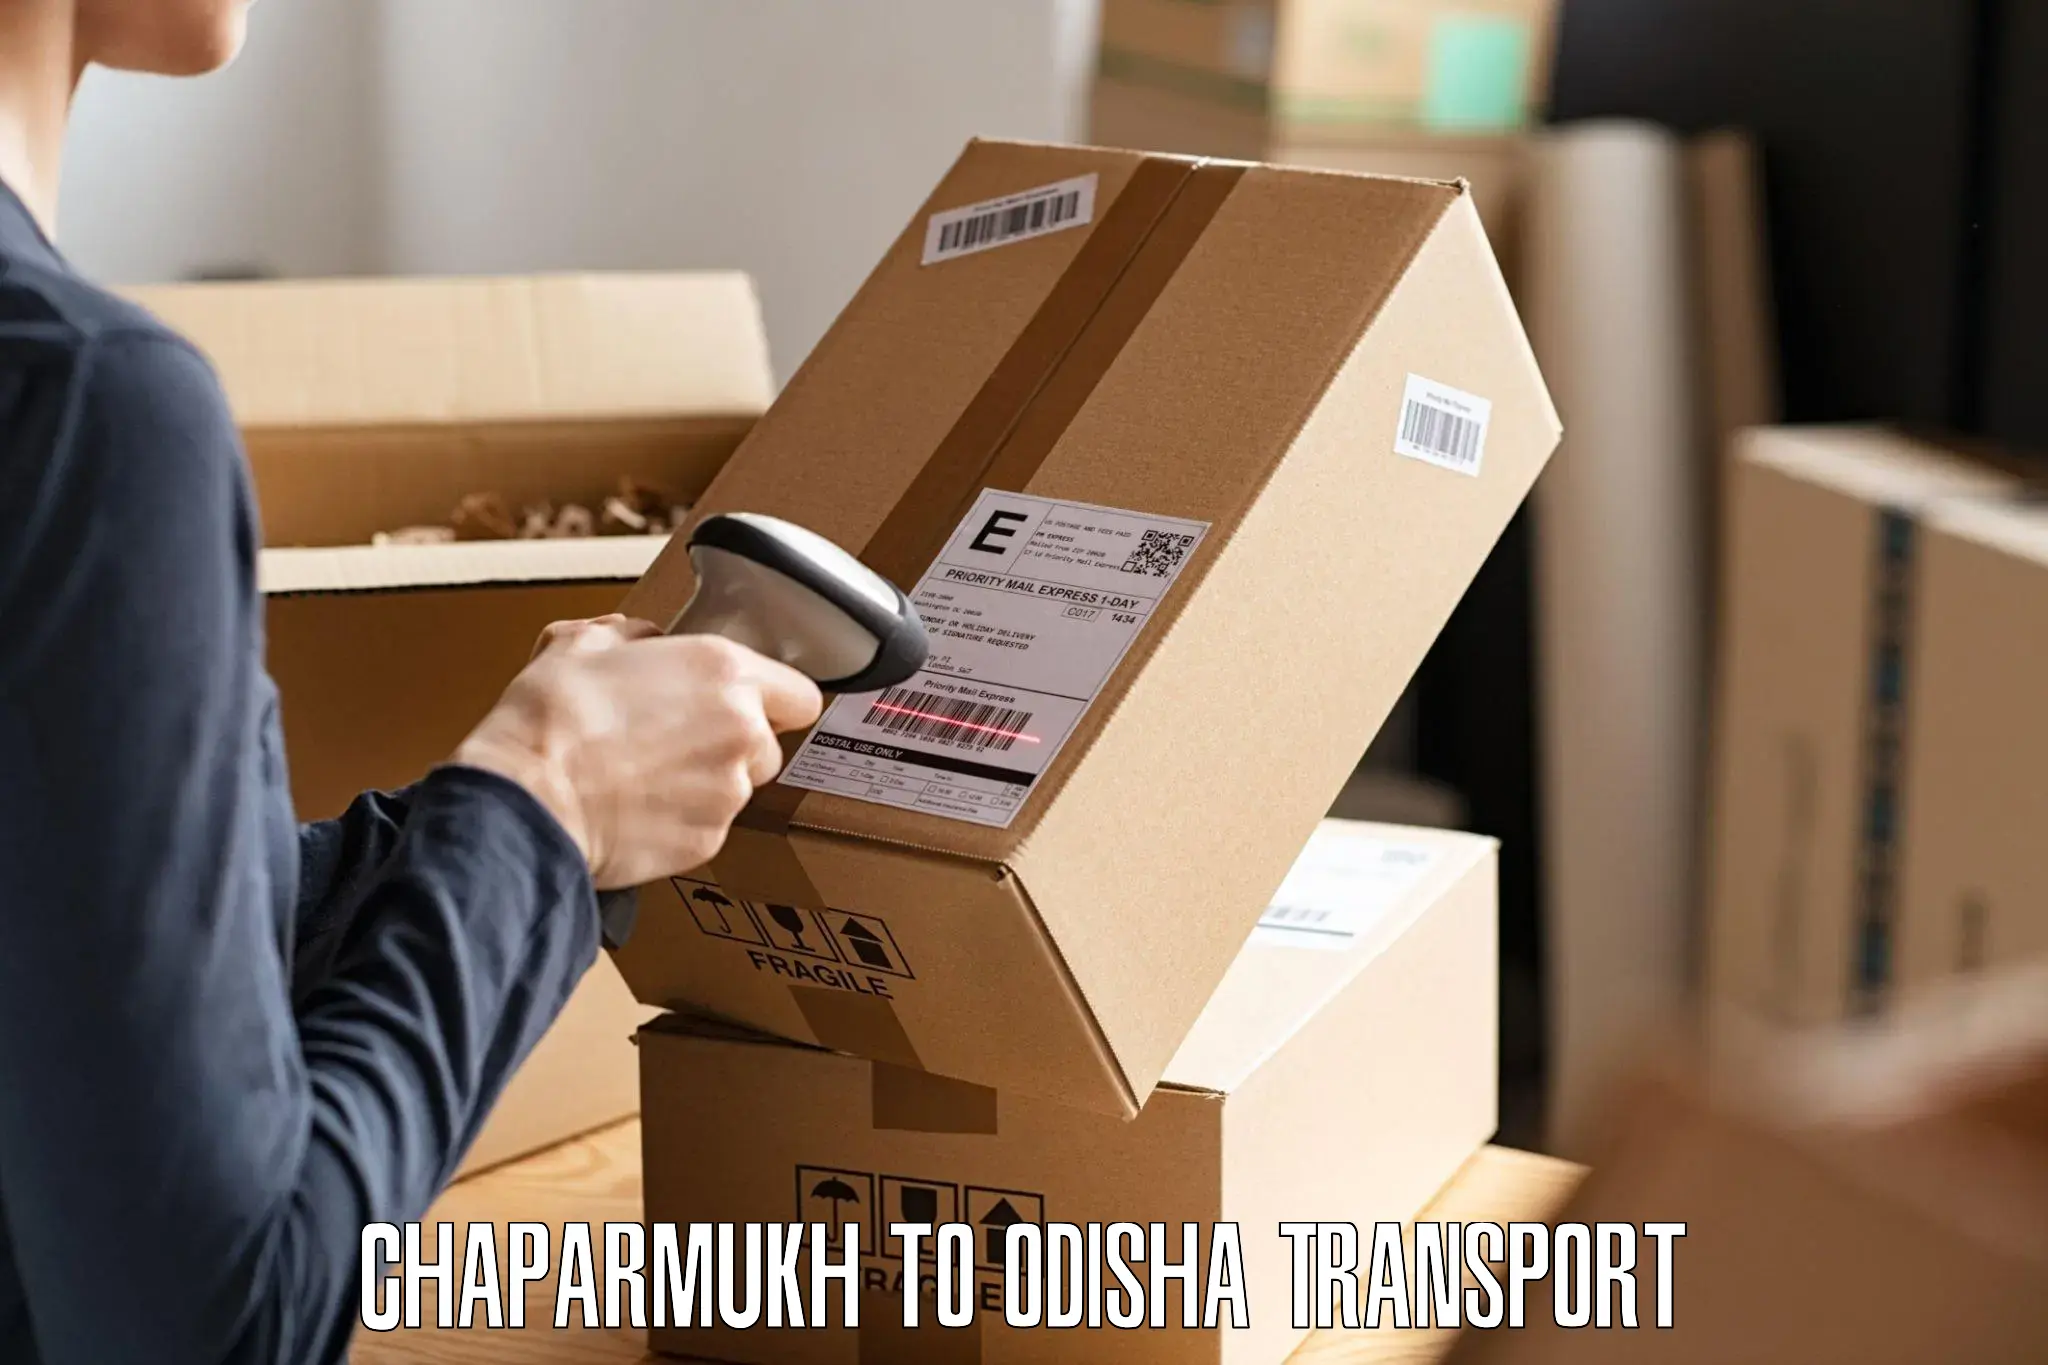 Container transport service Chaparmukh to Balangir